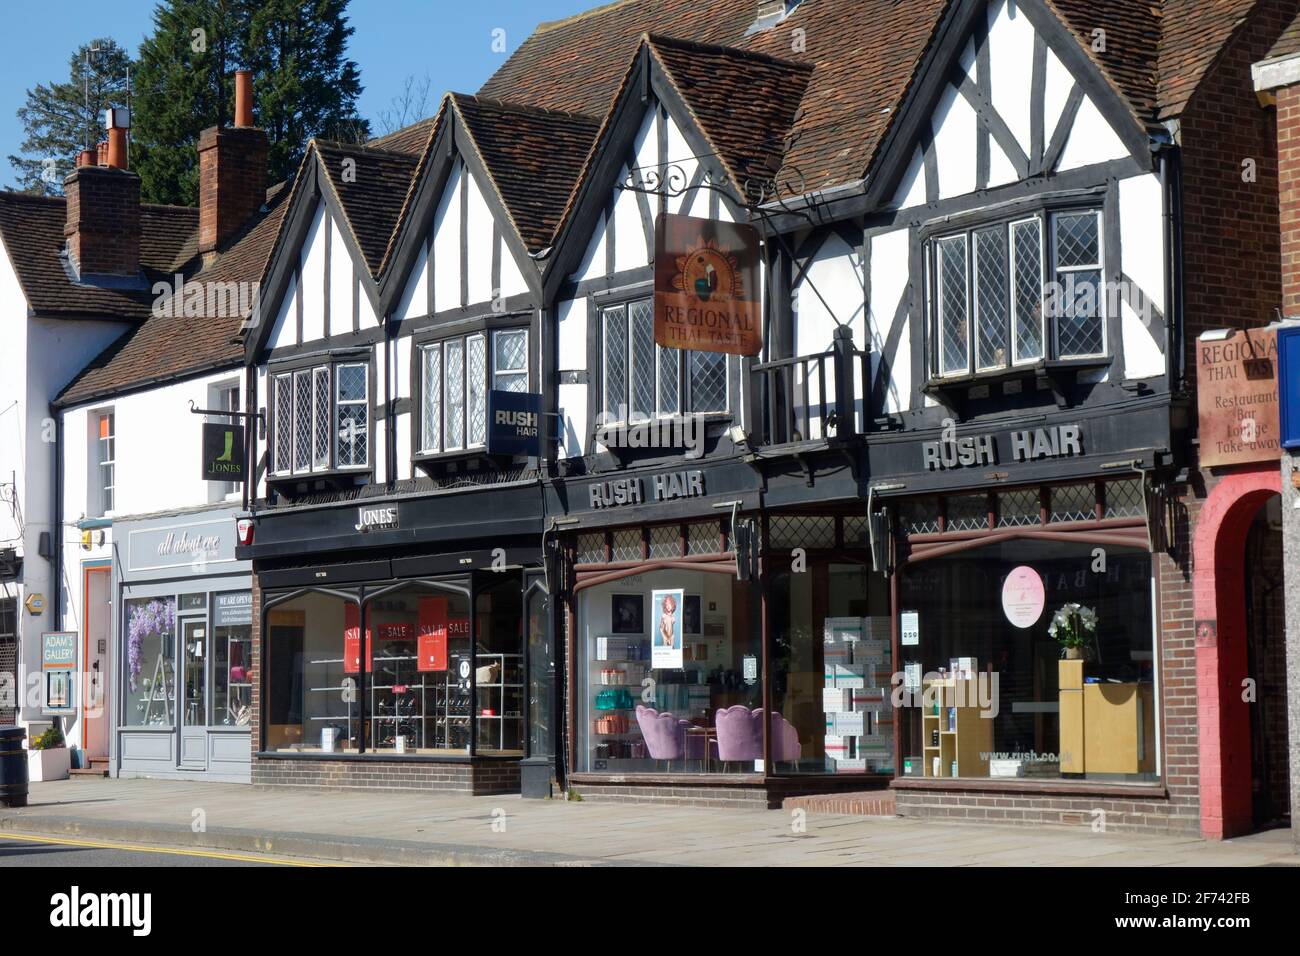 The Surrey town of Reigate, Surrey, England, United Kingdom. Stock Photo